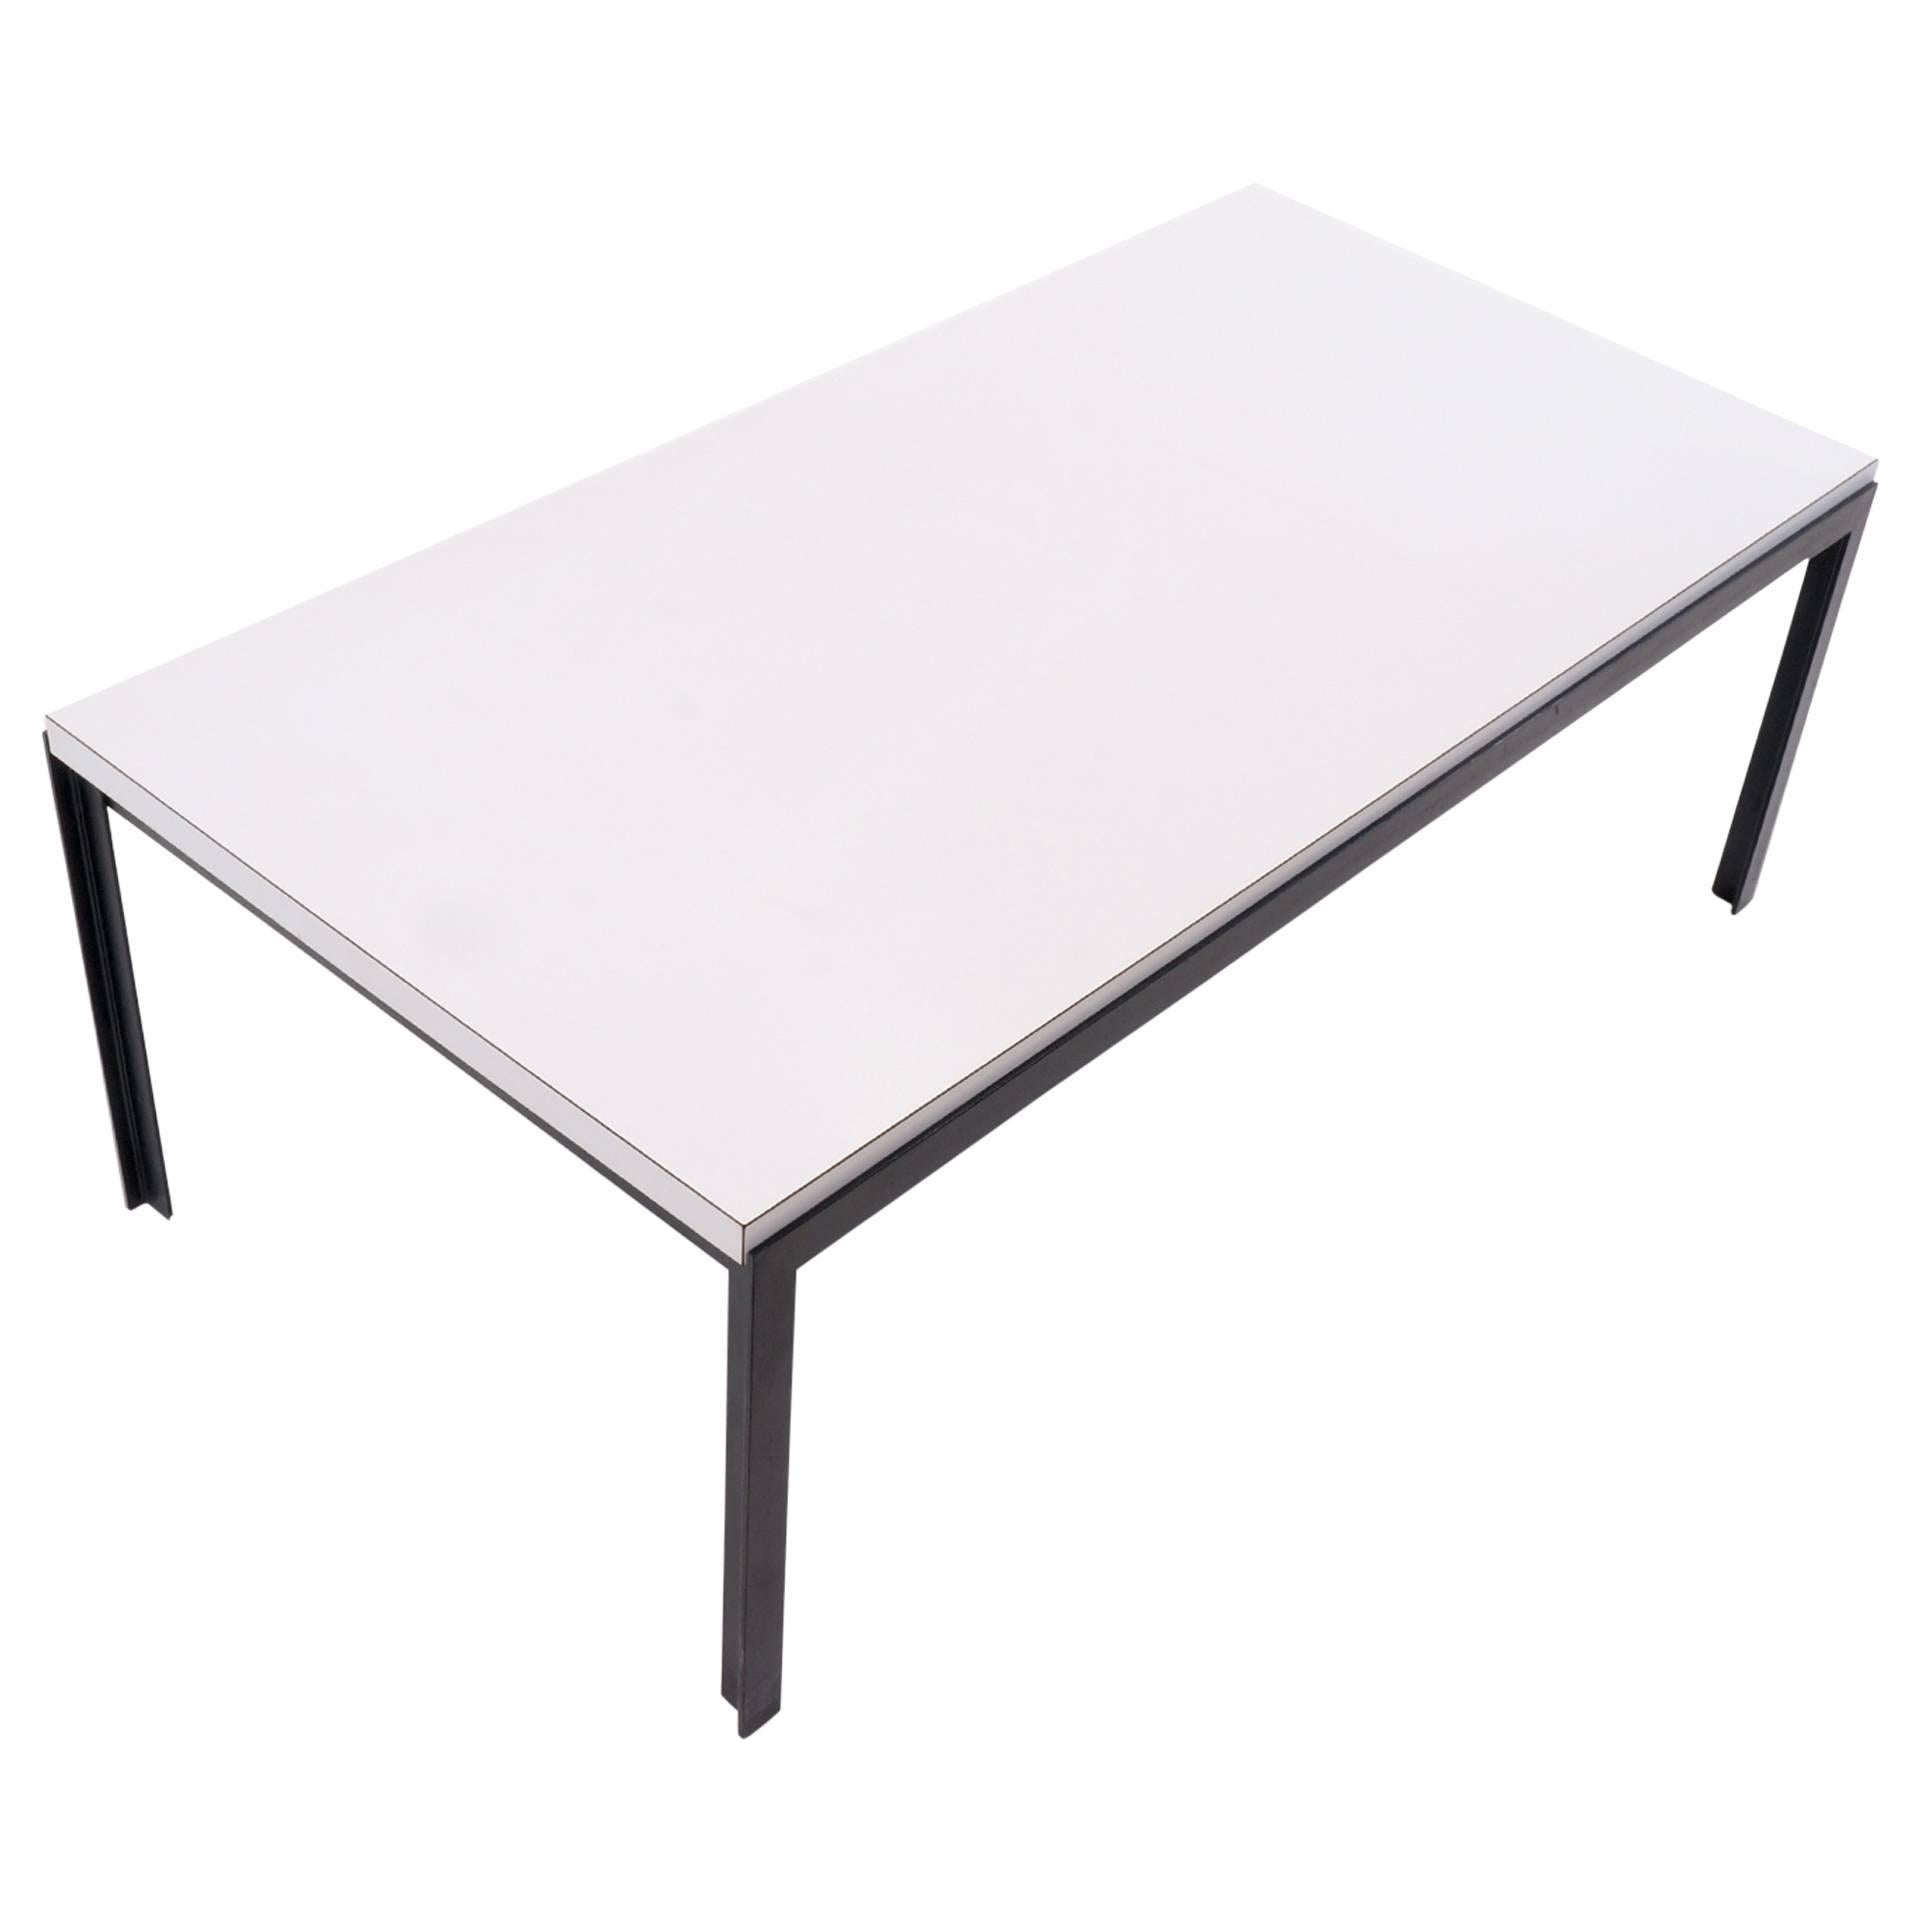 Florence Knoll Coffee Table, White Laminate, Black Steel Frame